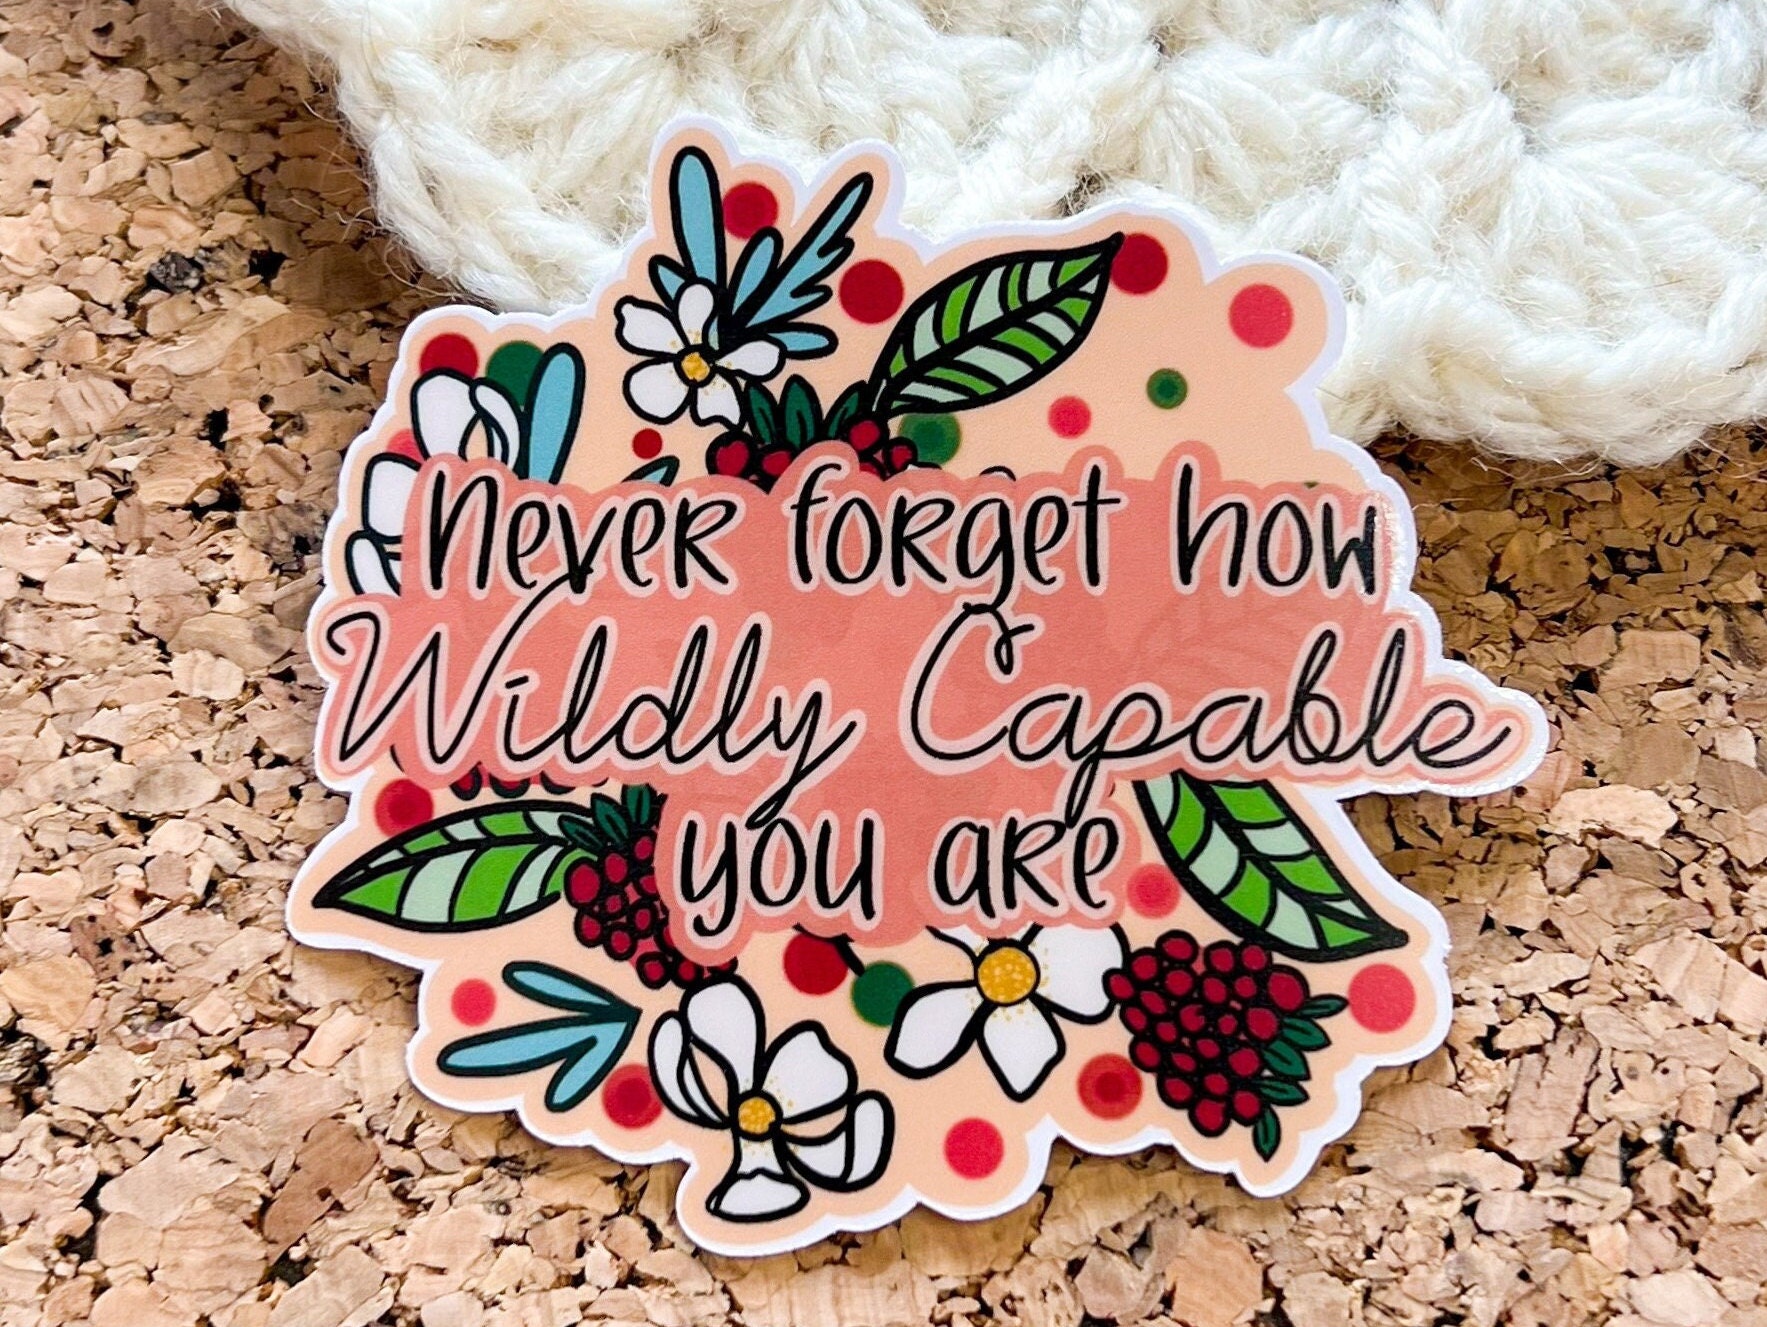 Sticker Quotes Inspirational Decals Waterproof Stickers Wildly Capable -   Canada